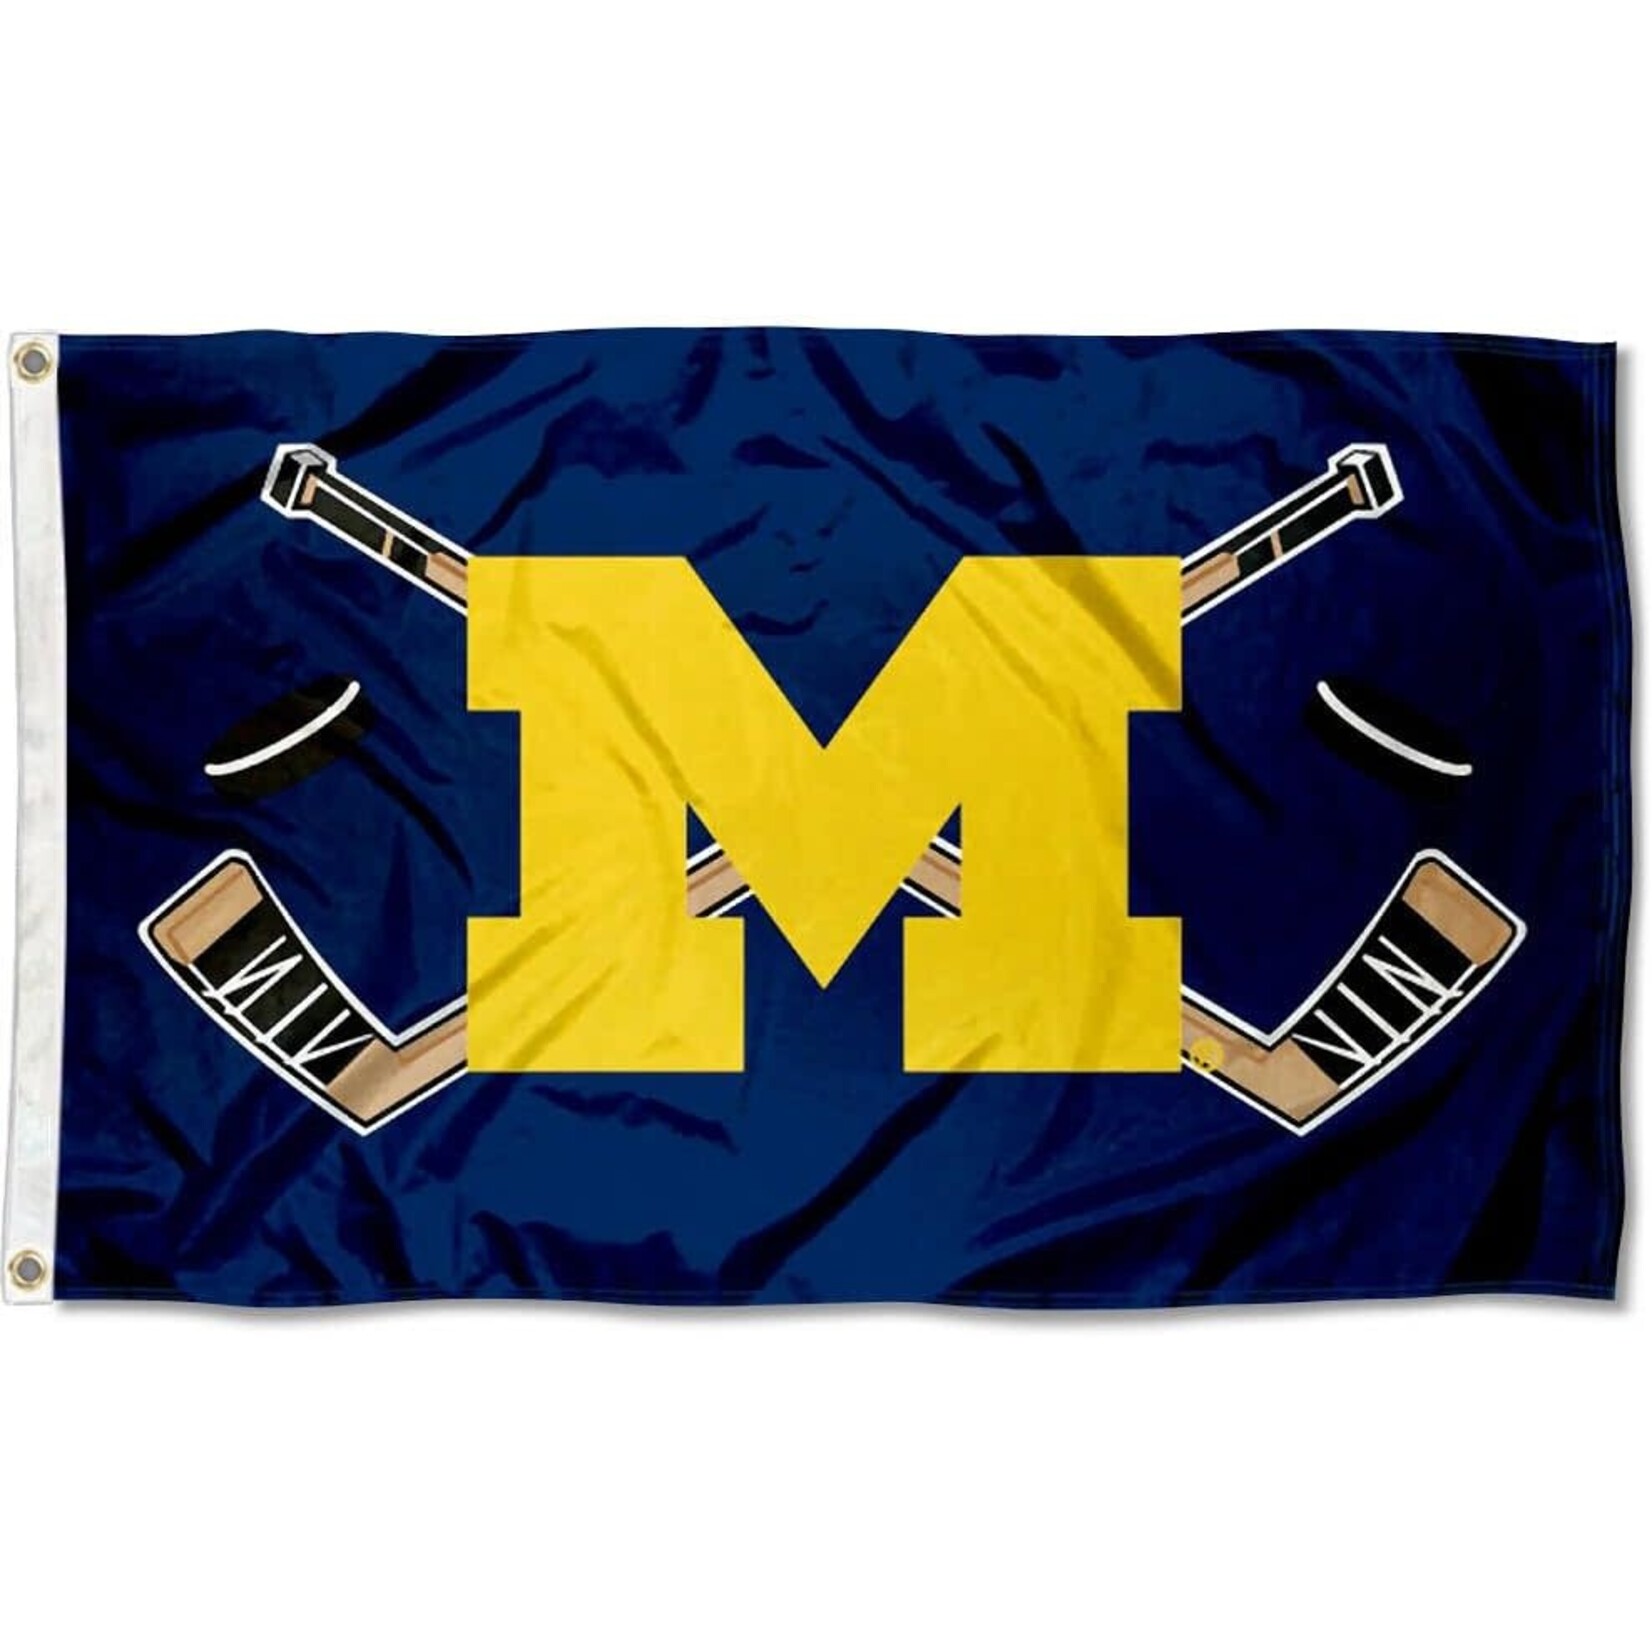 Sewing Concepts Michigan Wolverines Hockey Flag 3' x 5' with Grommets